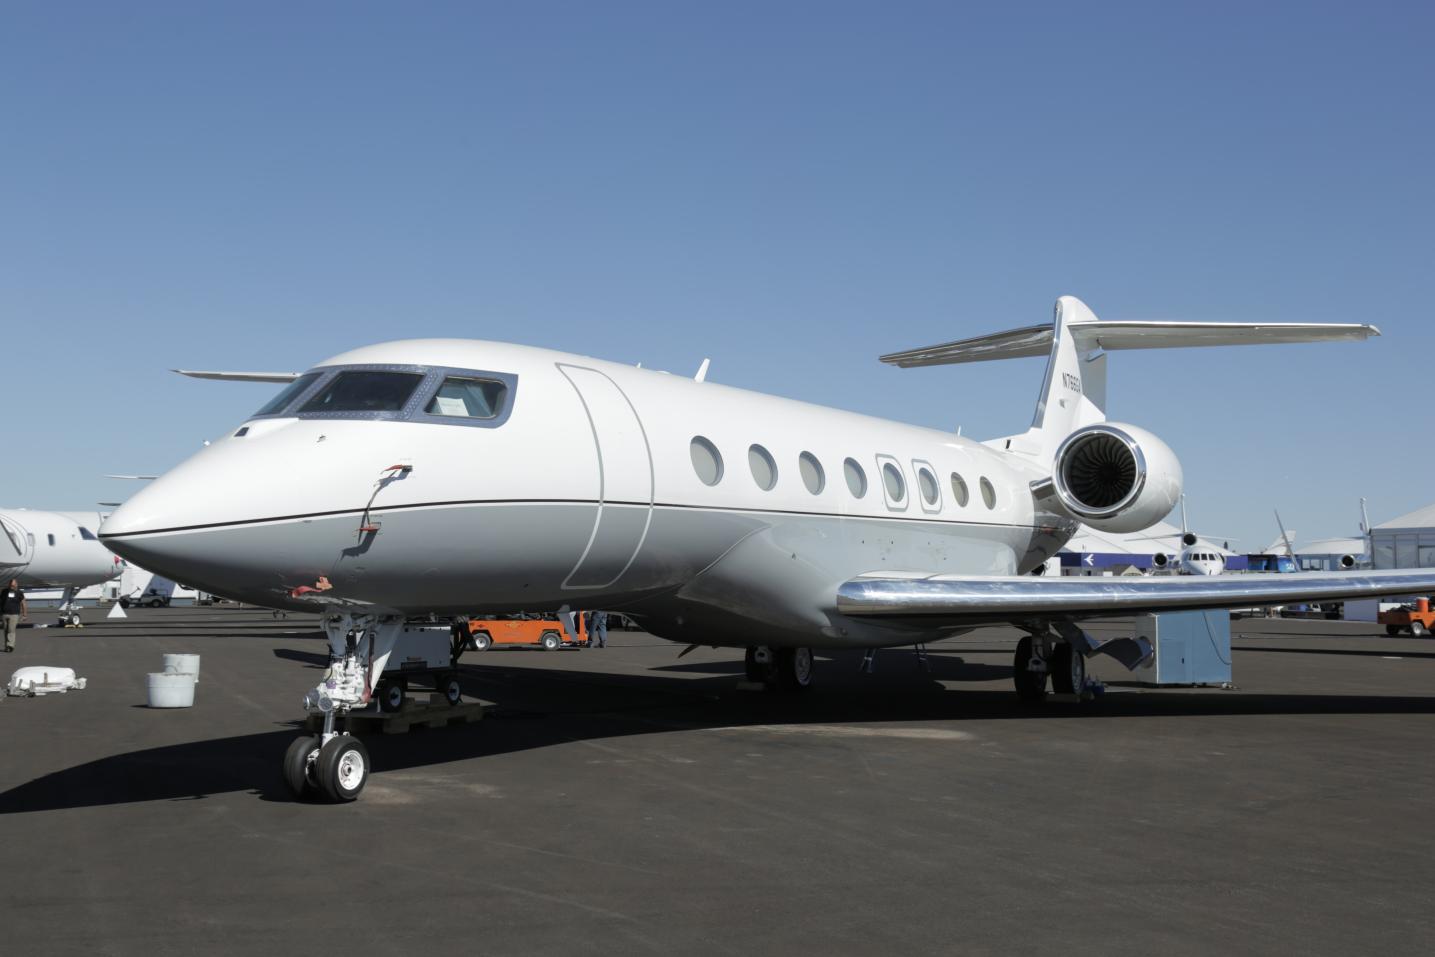 What Are the Key Features and Benefits of the Gulfstream G500?